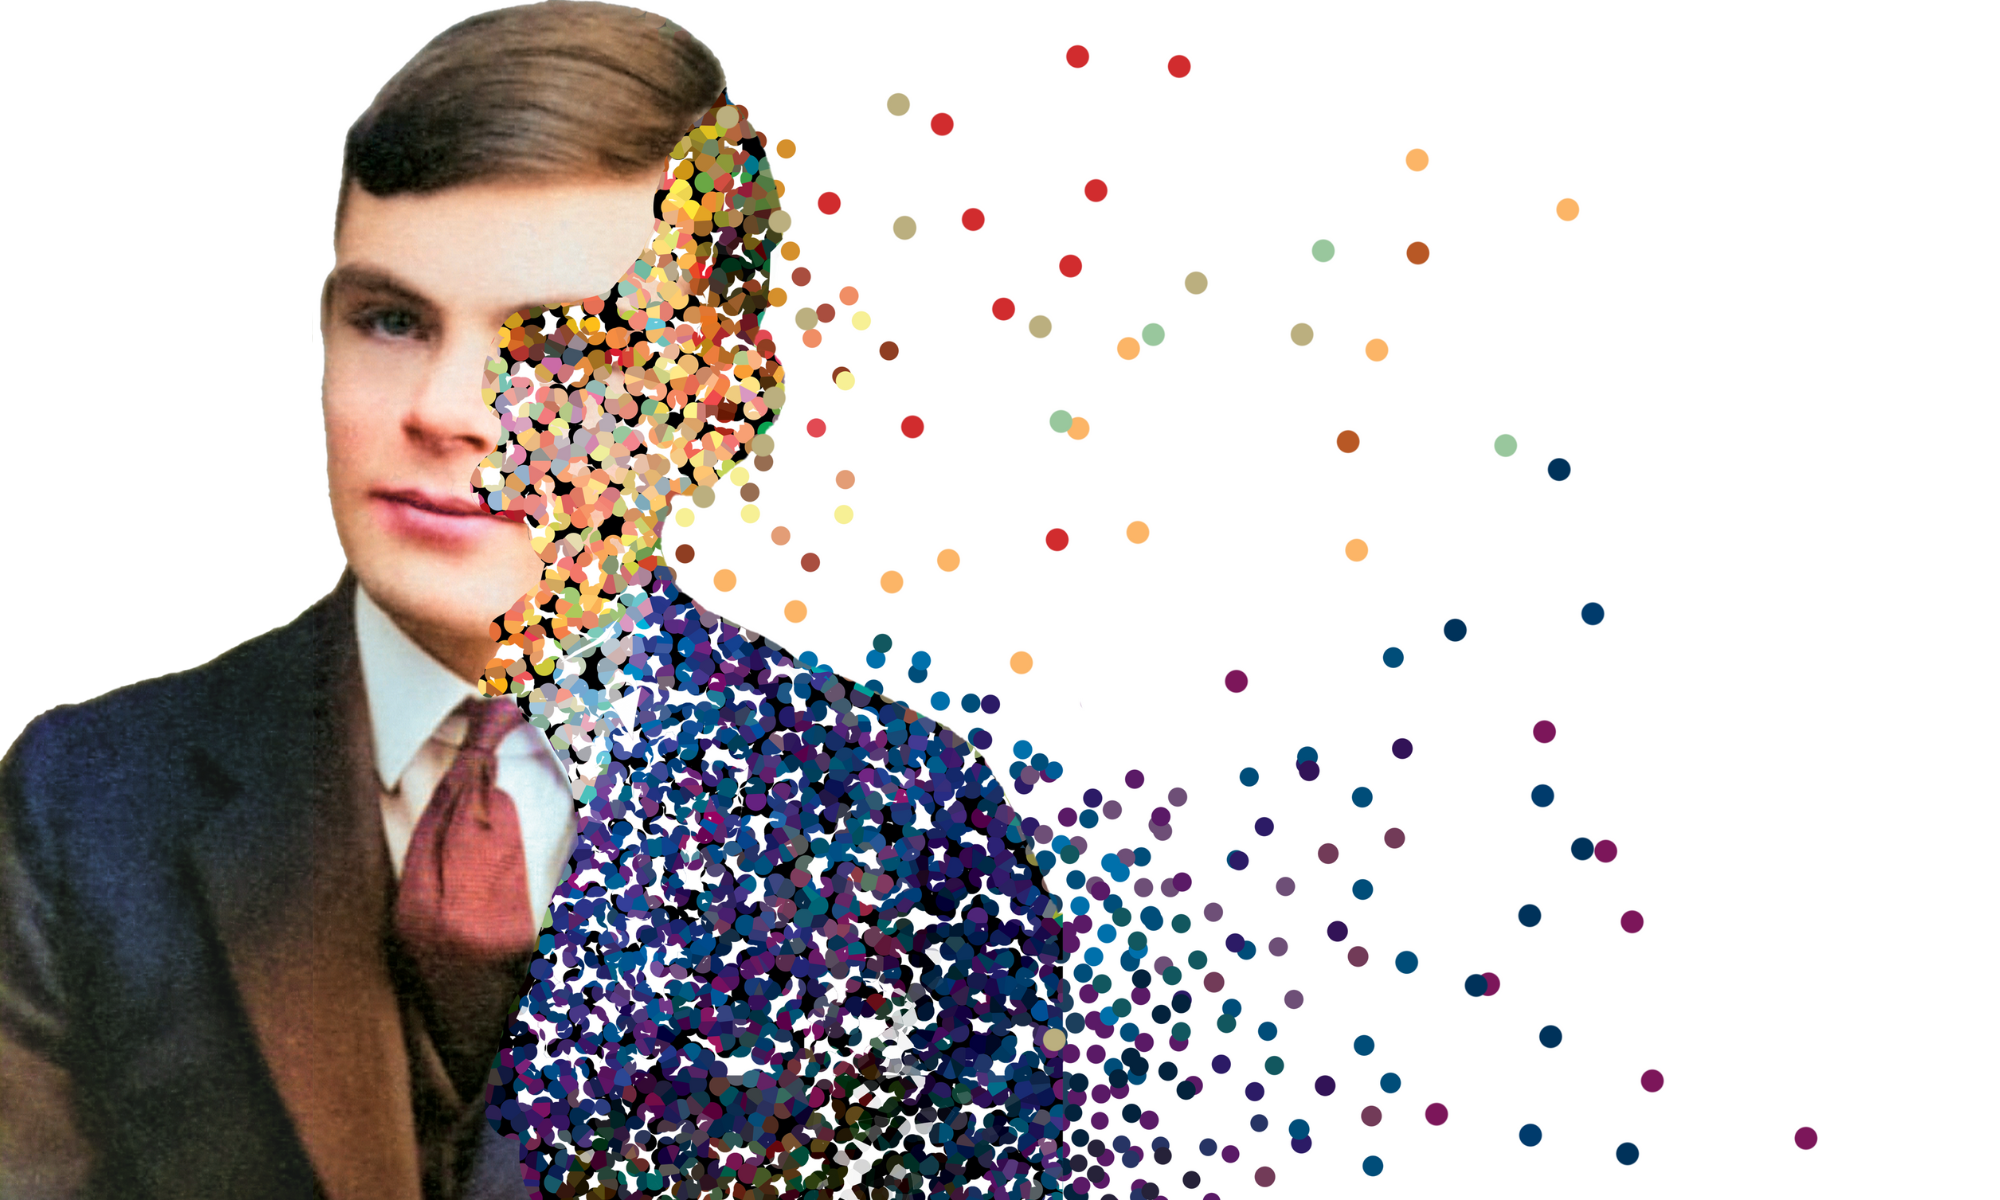 A young Alan Turing portrait that slowly fizzes out to pointillism dots